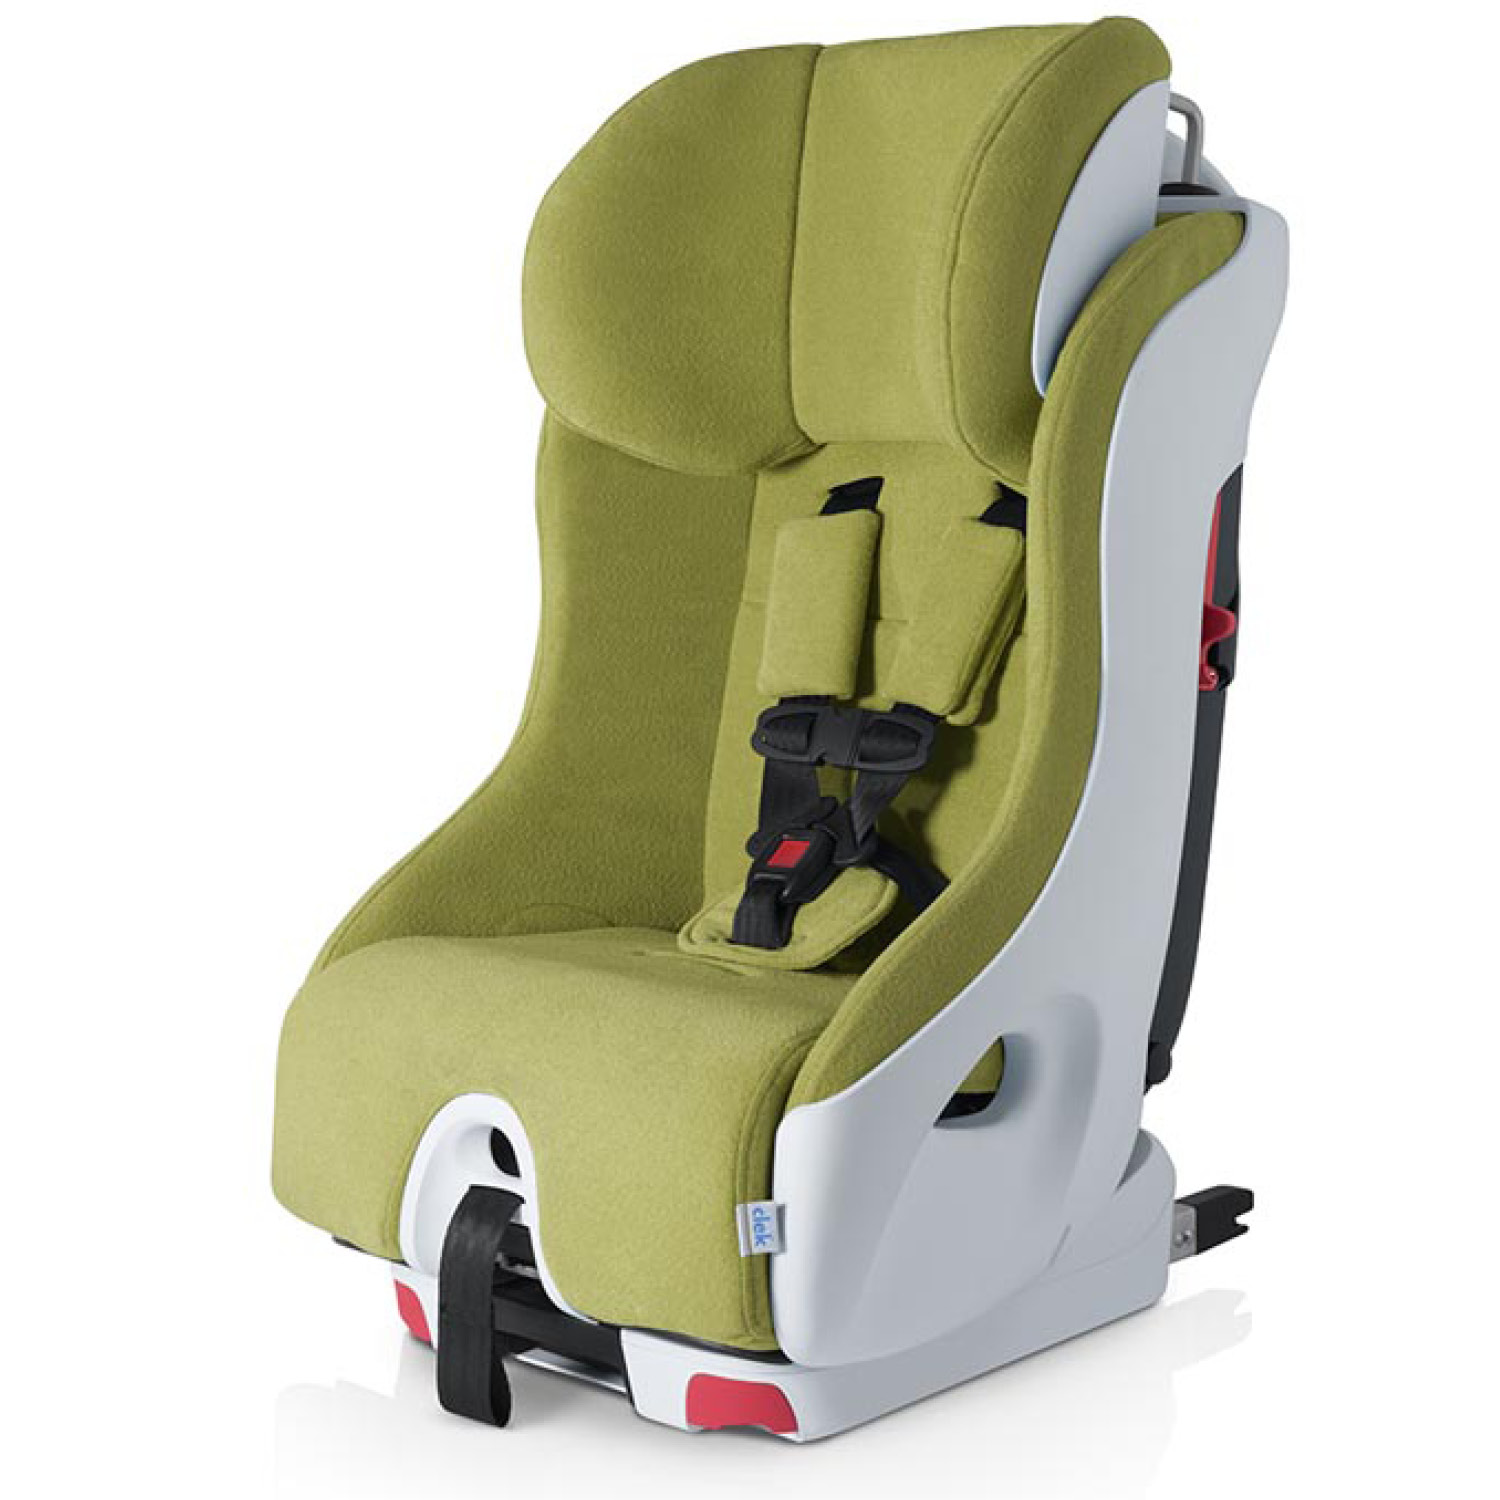 clek carseat in tank/dragonfly